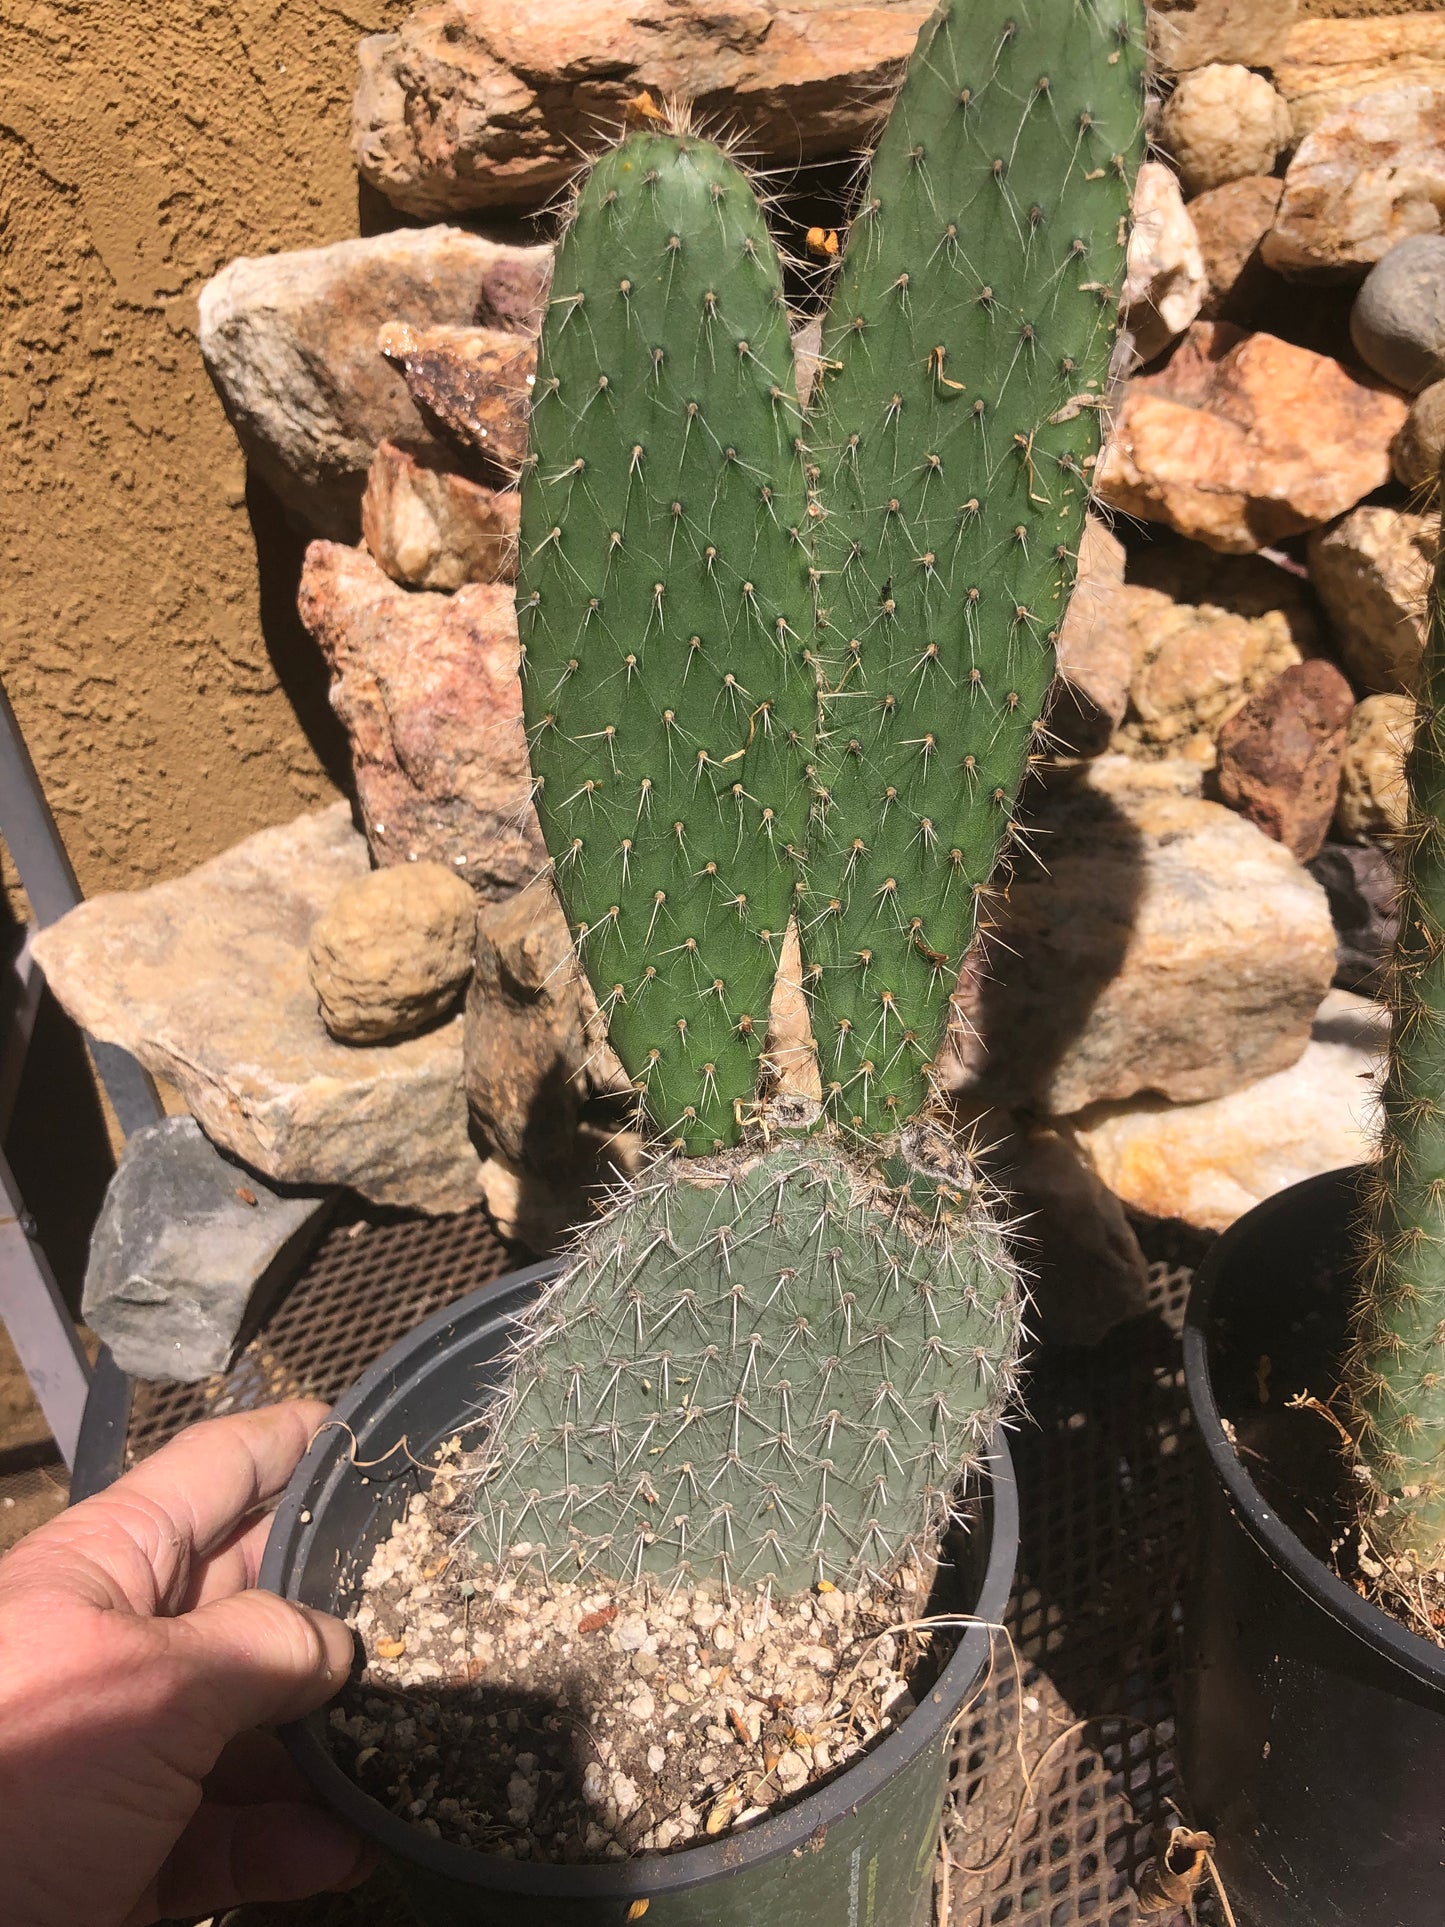 Opuntia engelmannii "White Thorned Prickly Pear" 13"Tall 5"Wide #13R